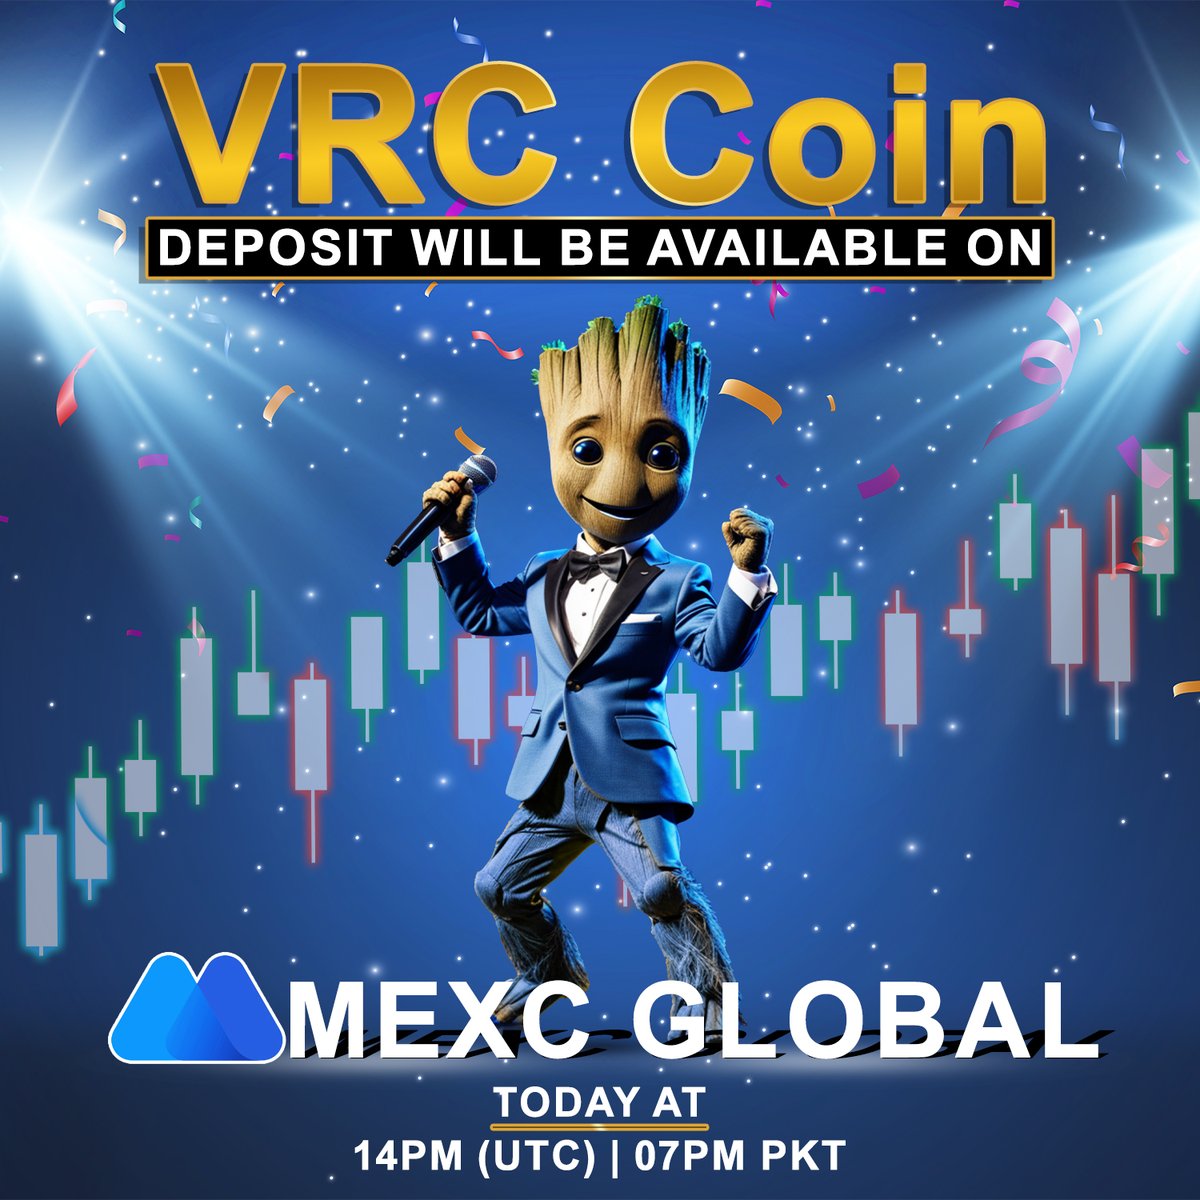 Exciting News! VRC Deposit will be open on MEXC Global at 7 pm PKT. Don't miss out on this opportunity!

MEXC Global: 👉mexc.com/exchange/VRC_U…

#VRC #MEXCGlobal #CryptoDeposit #OpportunityKnocks #BlockchainNews #CryptoTrading #GetReadyNow #Trading #Staking #VRCCoin